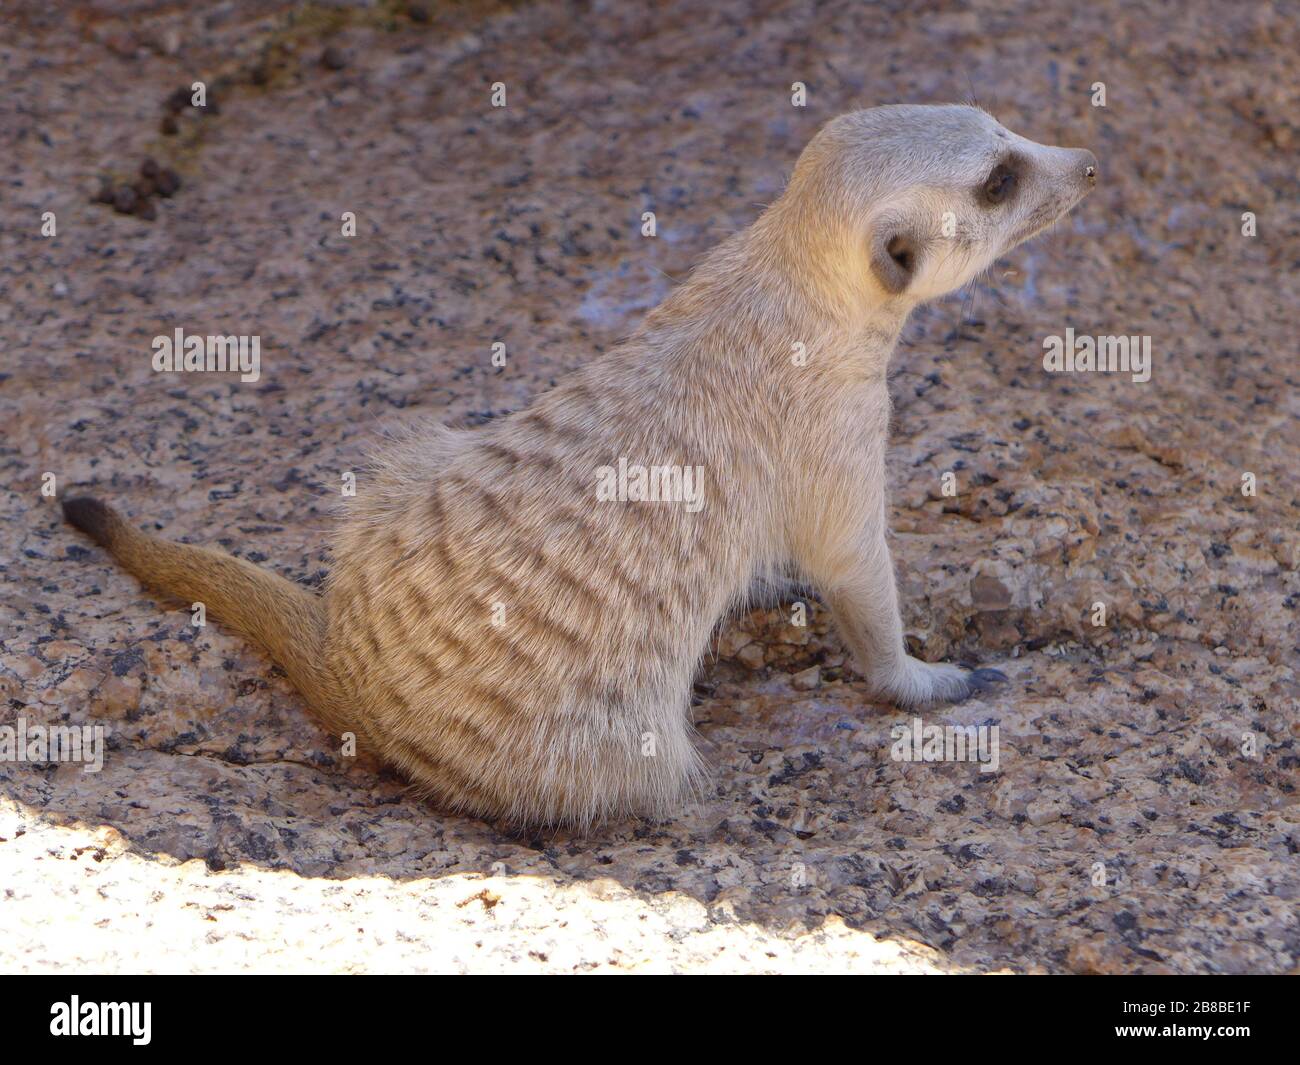 Suricate / meerkat - close-up side view of one small rodent animal looking ahead / foresight on stony rock ground in Spitzkoppe Erongo Namibia Africa Stock Photo